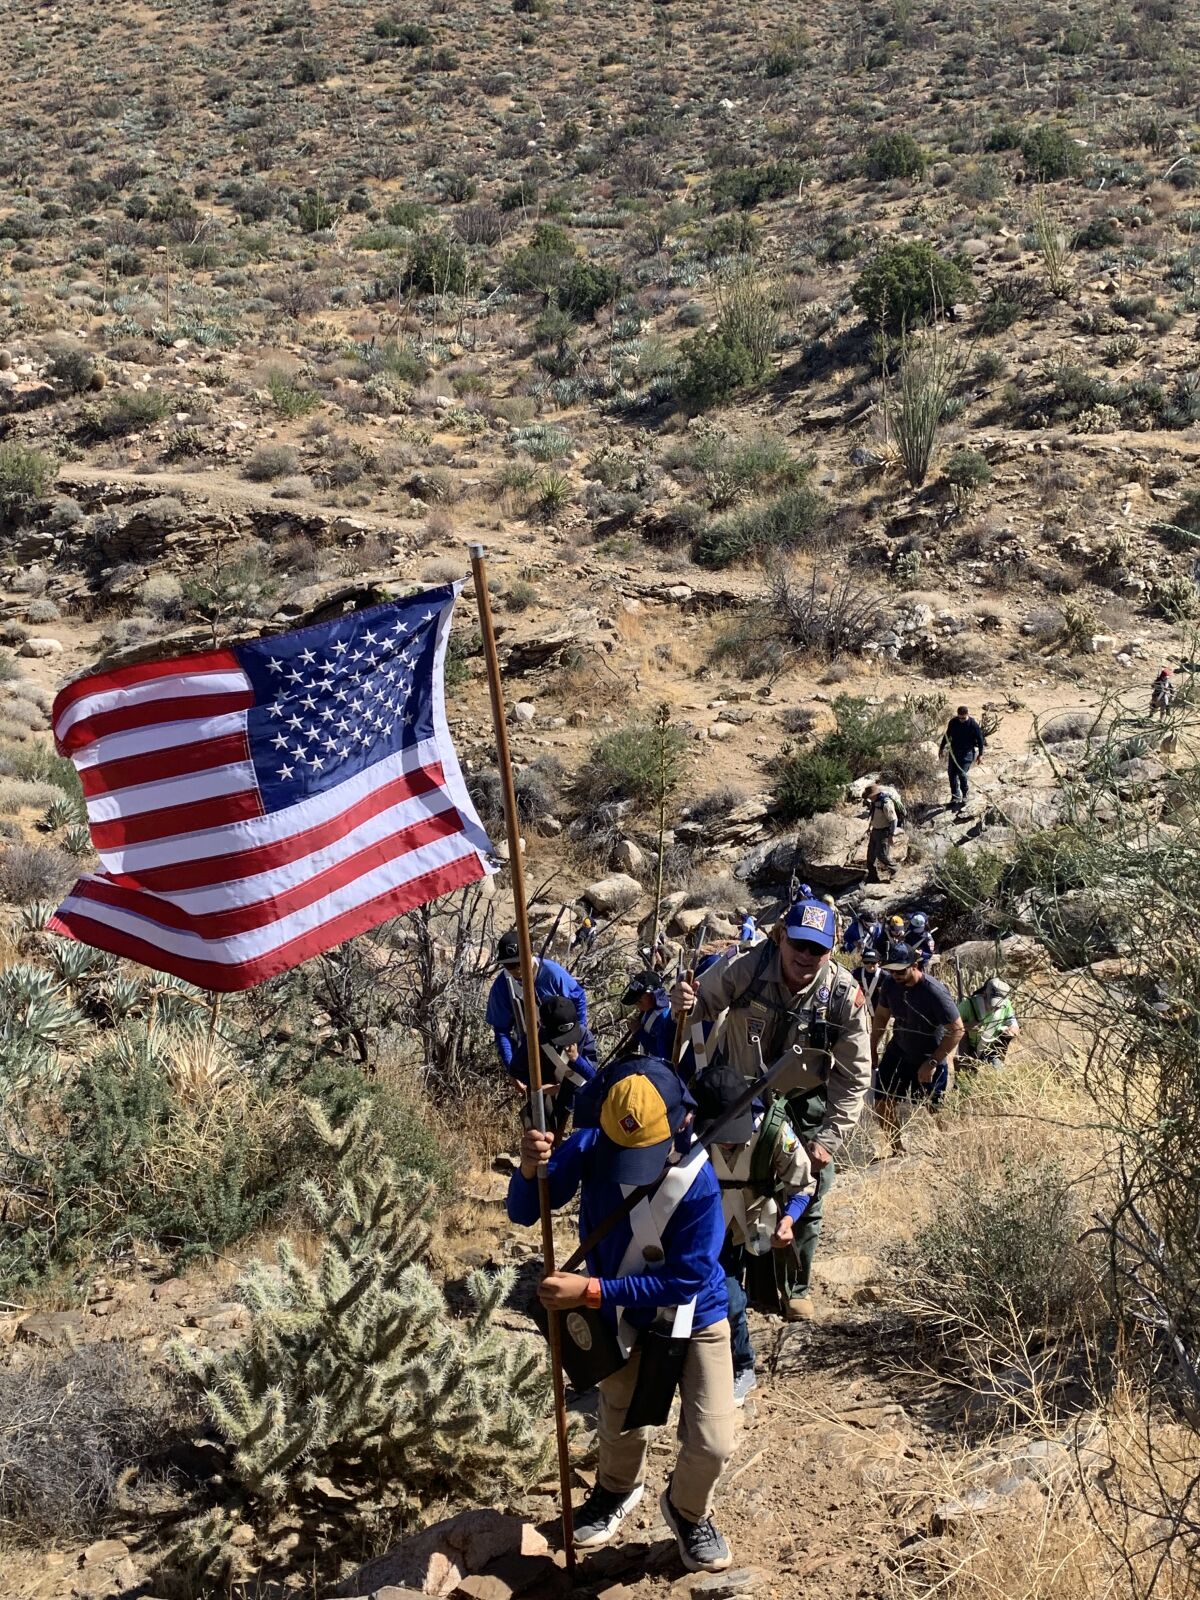 Cub Scouts climb uphill to a memorial site in Box Canyon on the Great Southern Overland Route of 1849 near Julian on Saturday, Oct. 19, during a five-mile hike re-creating a portion of the Mormon Battalion's march in the mid-1840s.